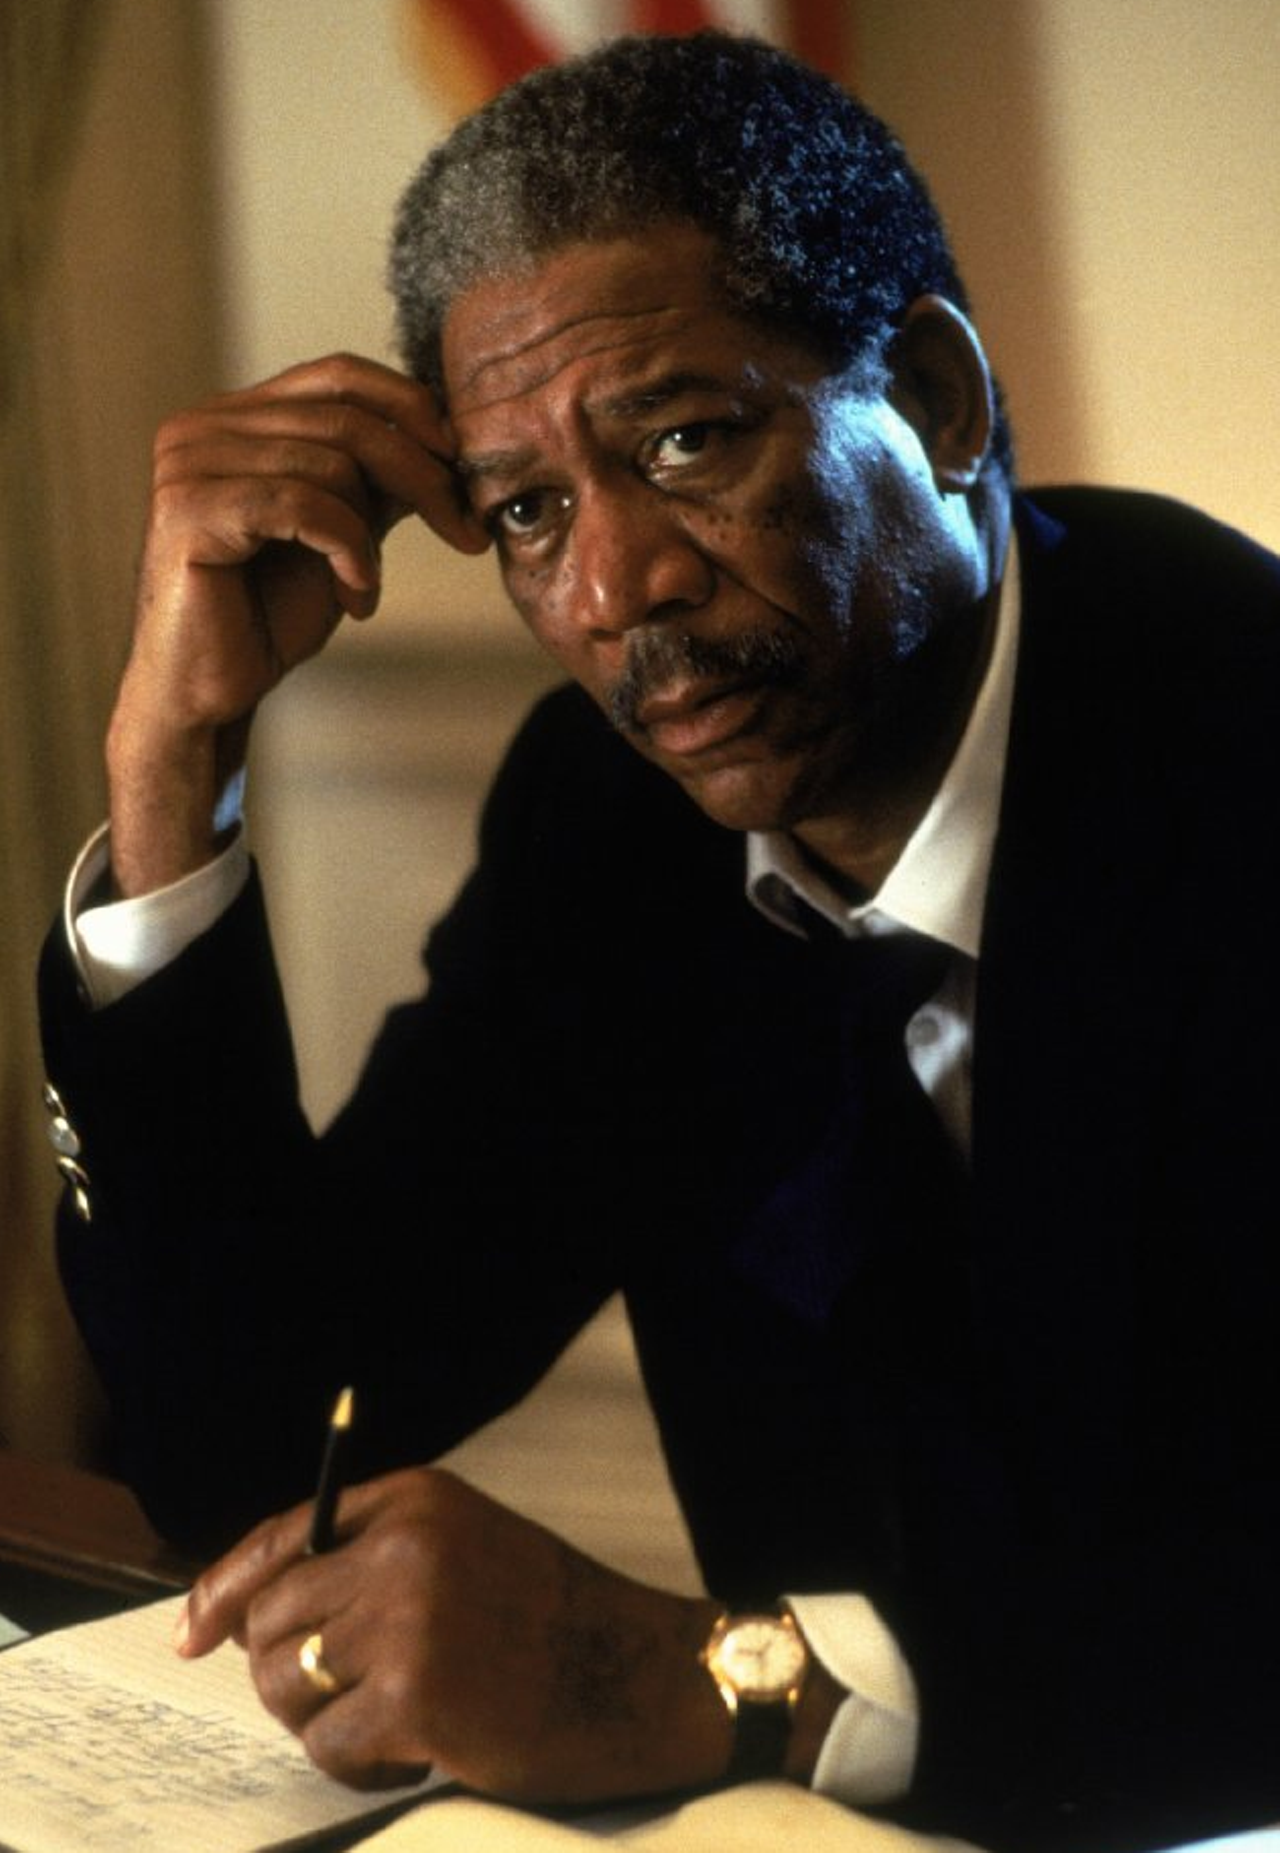 Morgan Freeman as President Tom Beck in Deep Impact (1998)
Read this in your best Morgan Freeman voice. As President Beck, he closes out the film with these lines: "We watched as the bombs shattered the second comet into a million pieces of ice and rock that burned harmlessly in our atmosphere and lit up the sky for an hour. Still, we were left with the devastation of the first. The waters reached as far inland as the Ohio and Tennessee Valleys. It washed away farms and towns, forests and skyscrapers. But, the water receded. The wave hit Europe and Africa too. Millions were lost, and countless more left homeless. But the waters receded. Cities fall, but they are rebuilt. And heroes die, but they are remembered. We honor them with every brick we lay, with every field we sow, With every child we comfort, and then teach to rejoice in what we have been re-given. Our planet. Our home. So now, let us begin."